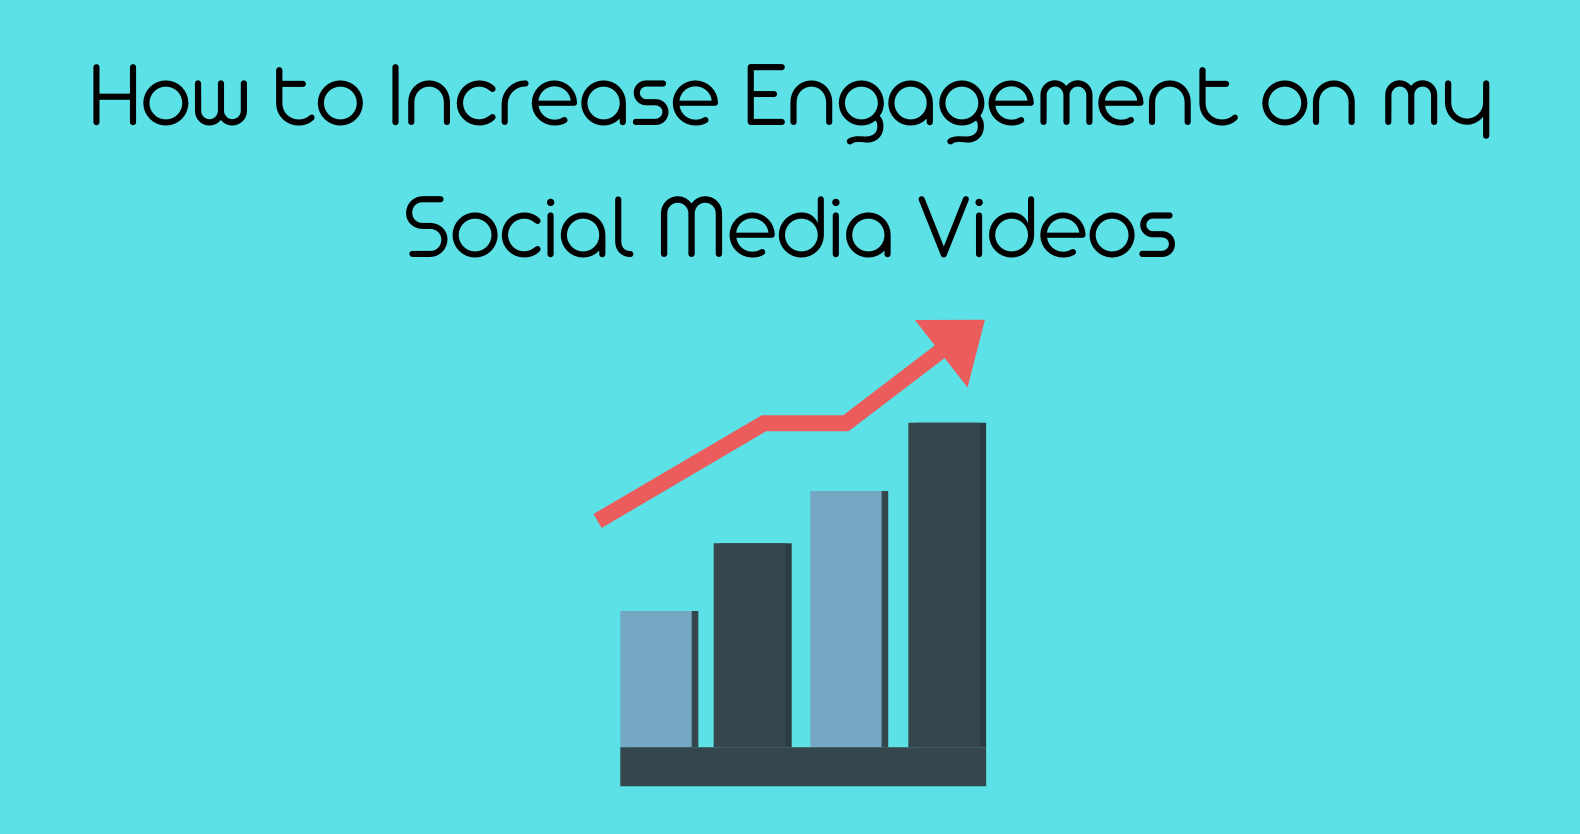 How to Increase Engagement on my Social Media Videos